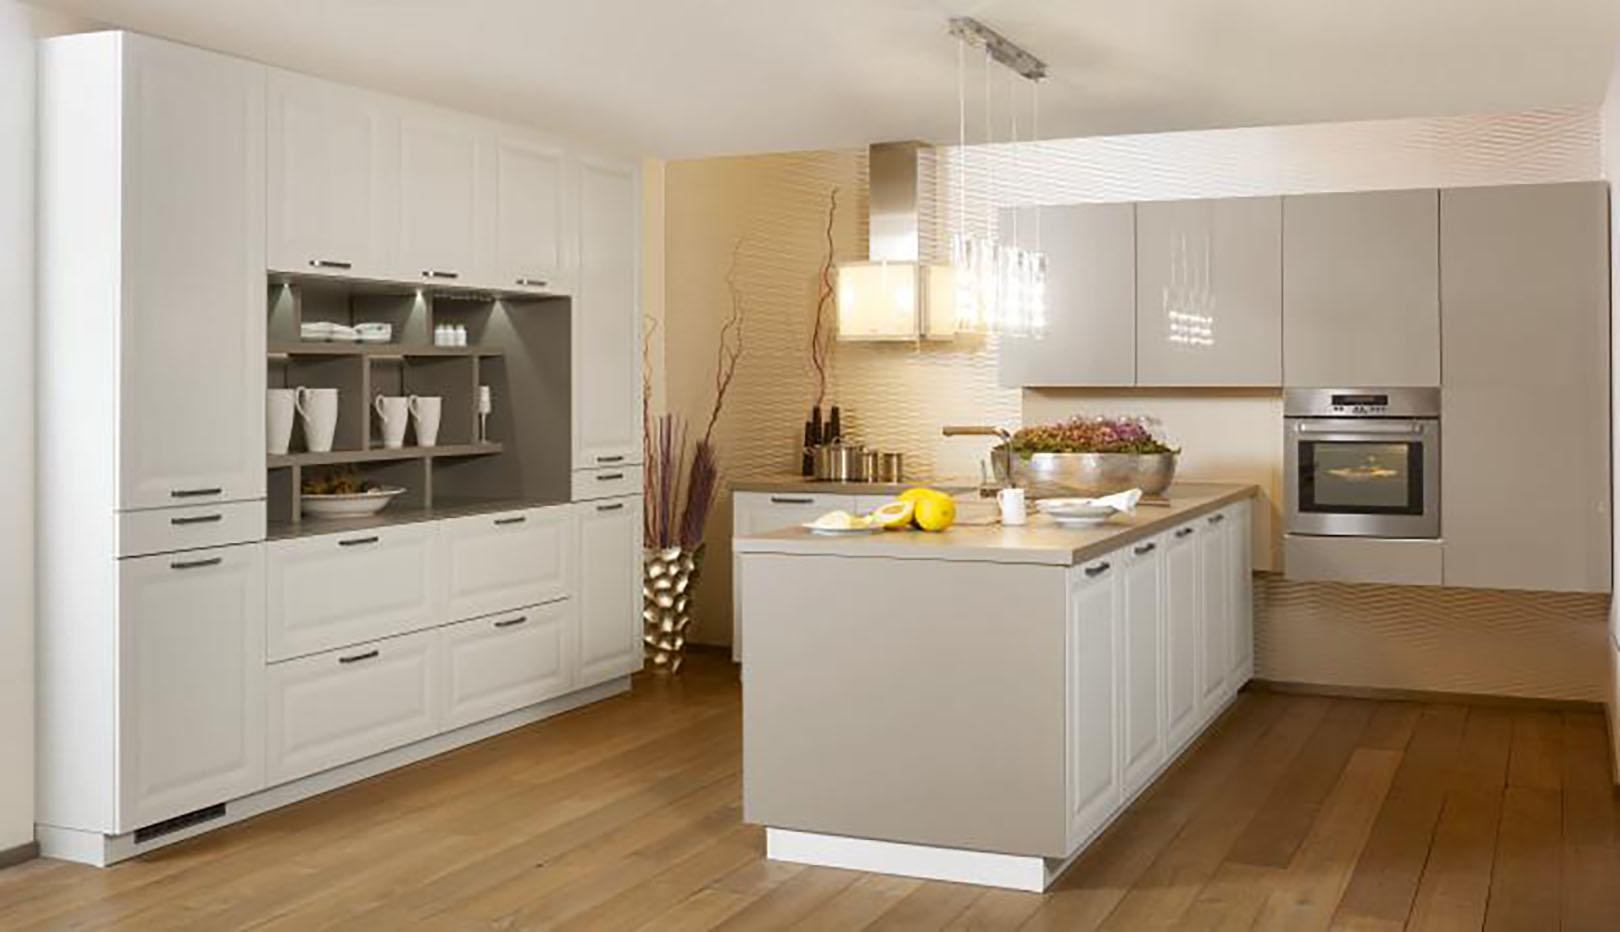 hand-painted-White-shaker-kitchen-with-beige-high-gloss-wall-units-and-tall-bank-of-units-with-centre-display-piece-1